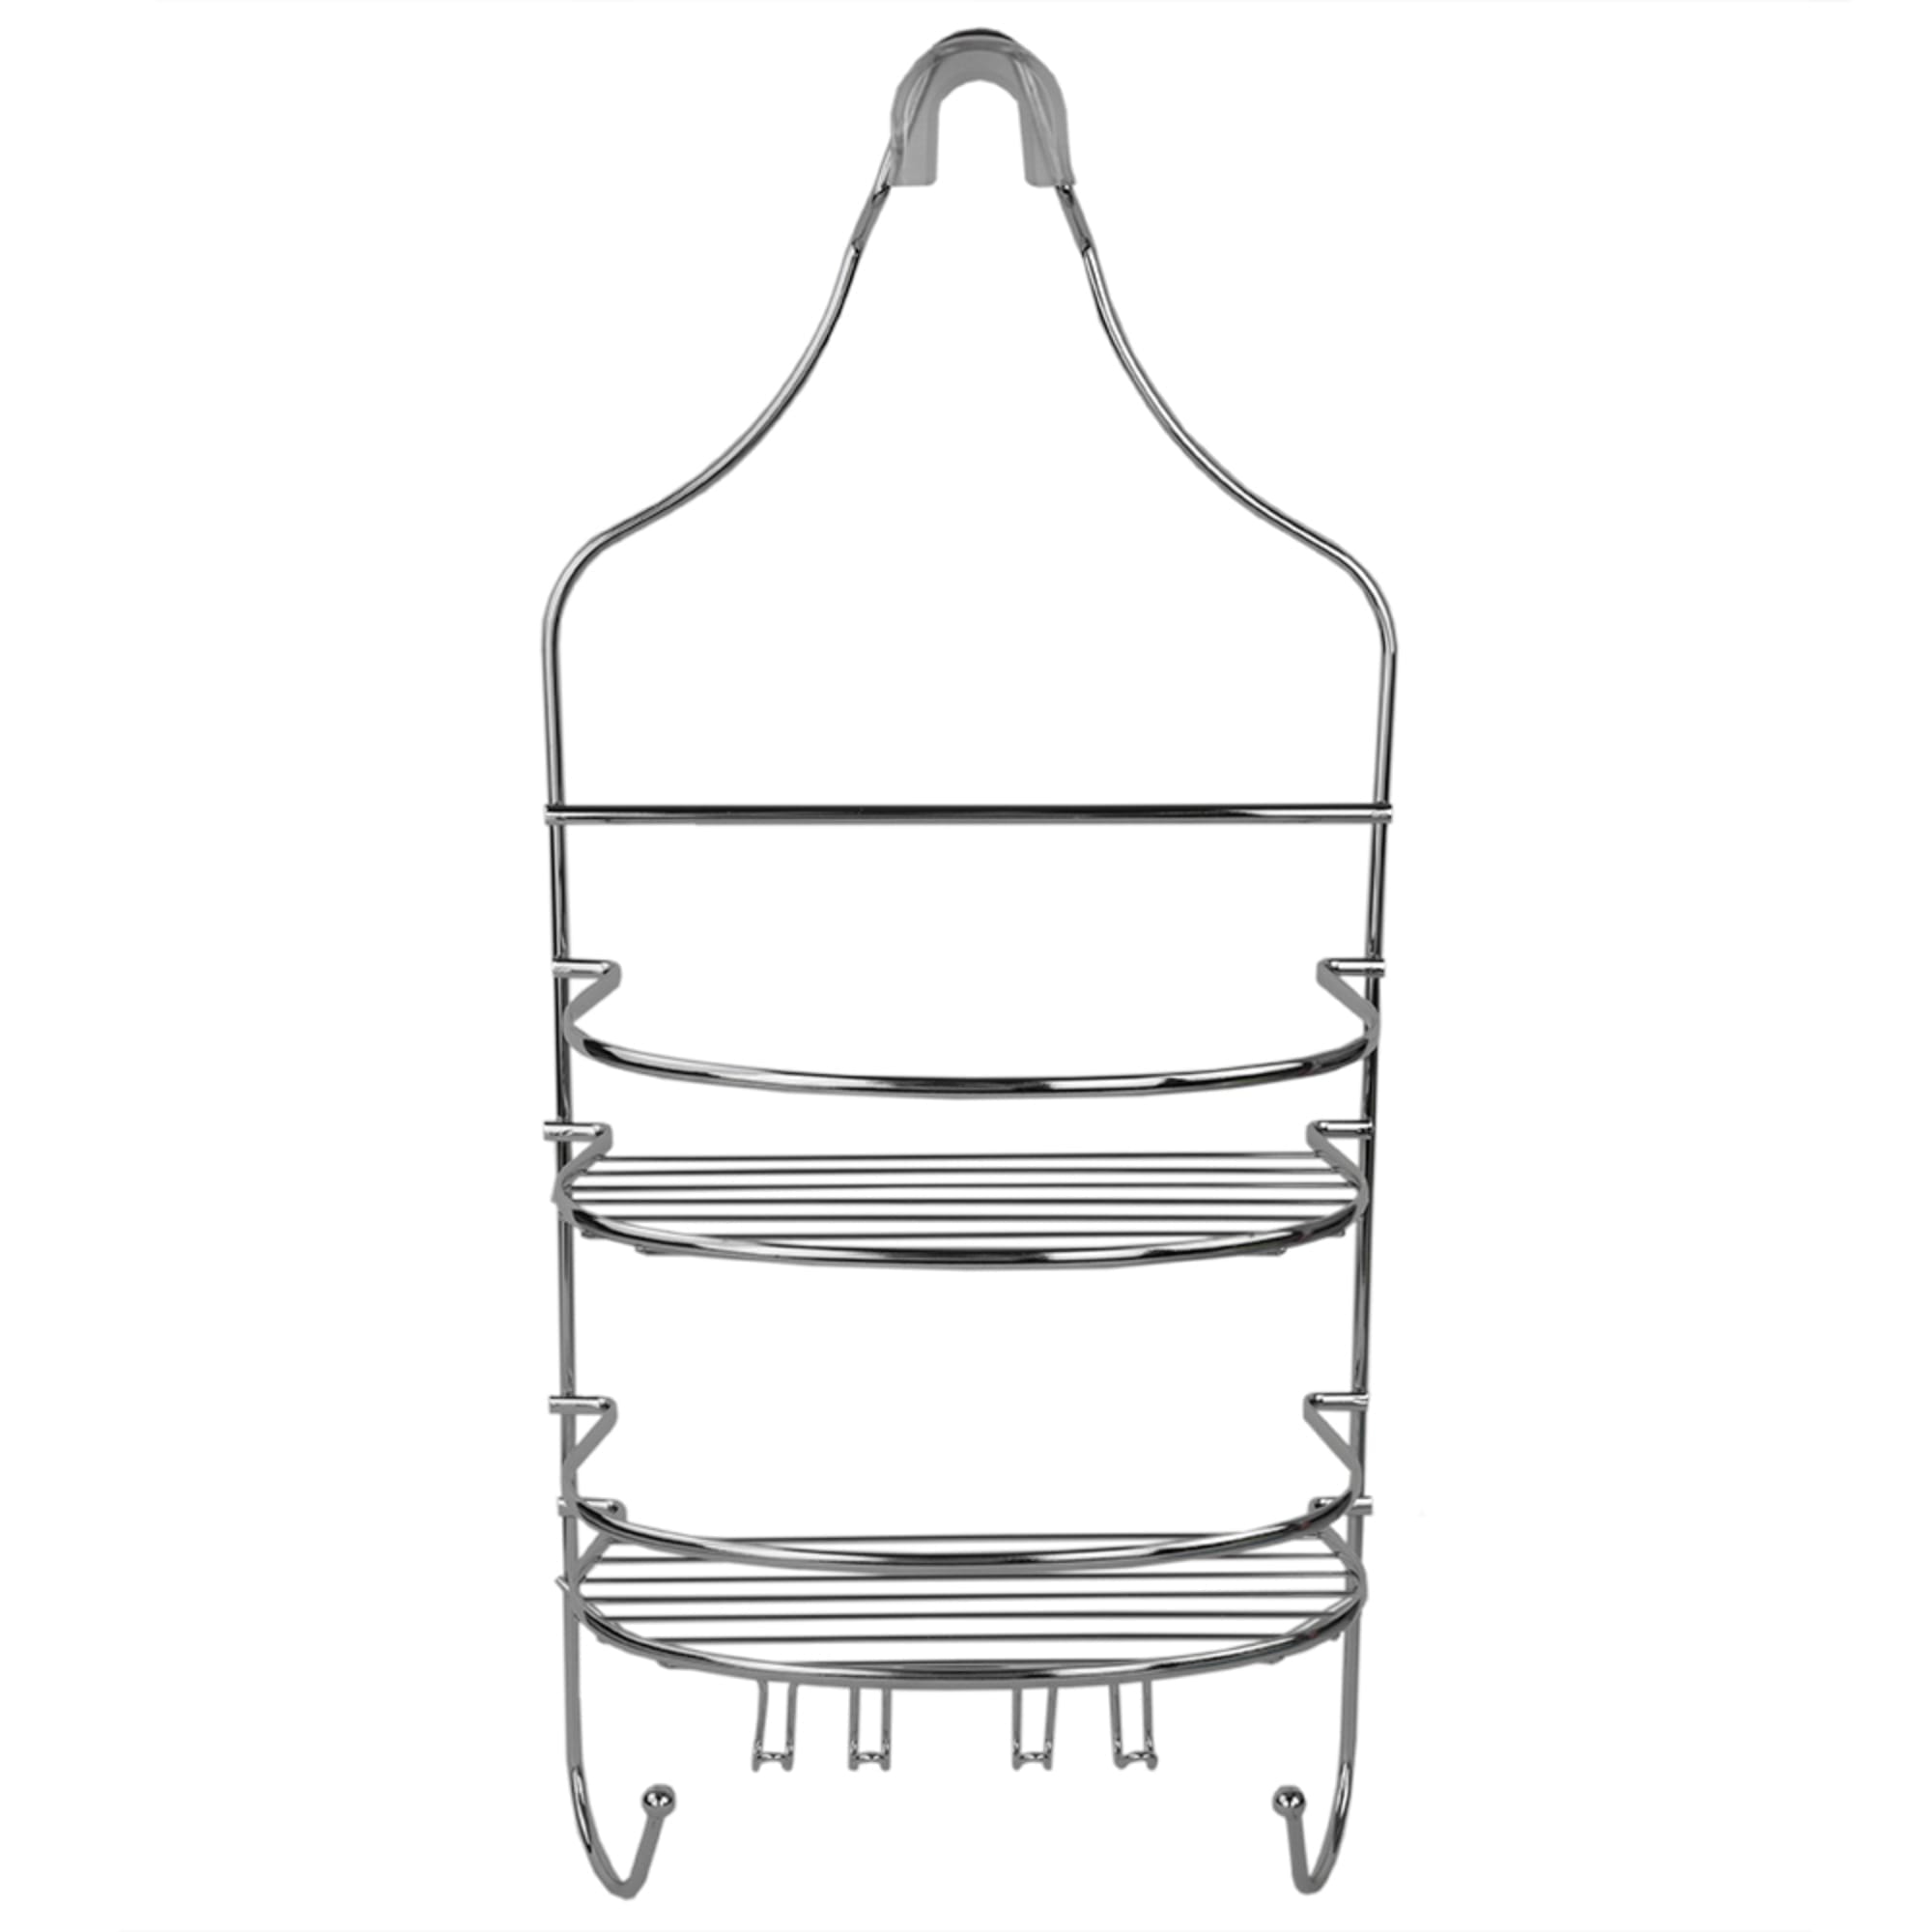 Home Basics Chrome Plated Steel Flat Wire Shower Caddy $6.00 EACH, CASE PACK OF 12